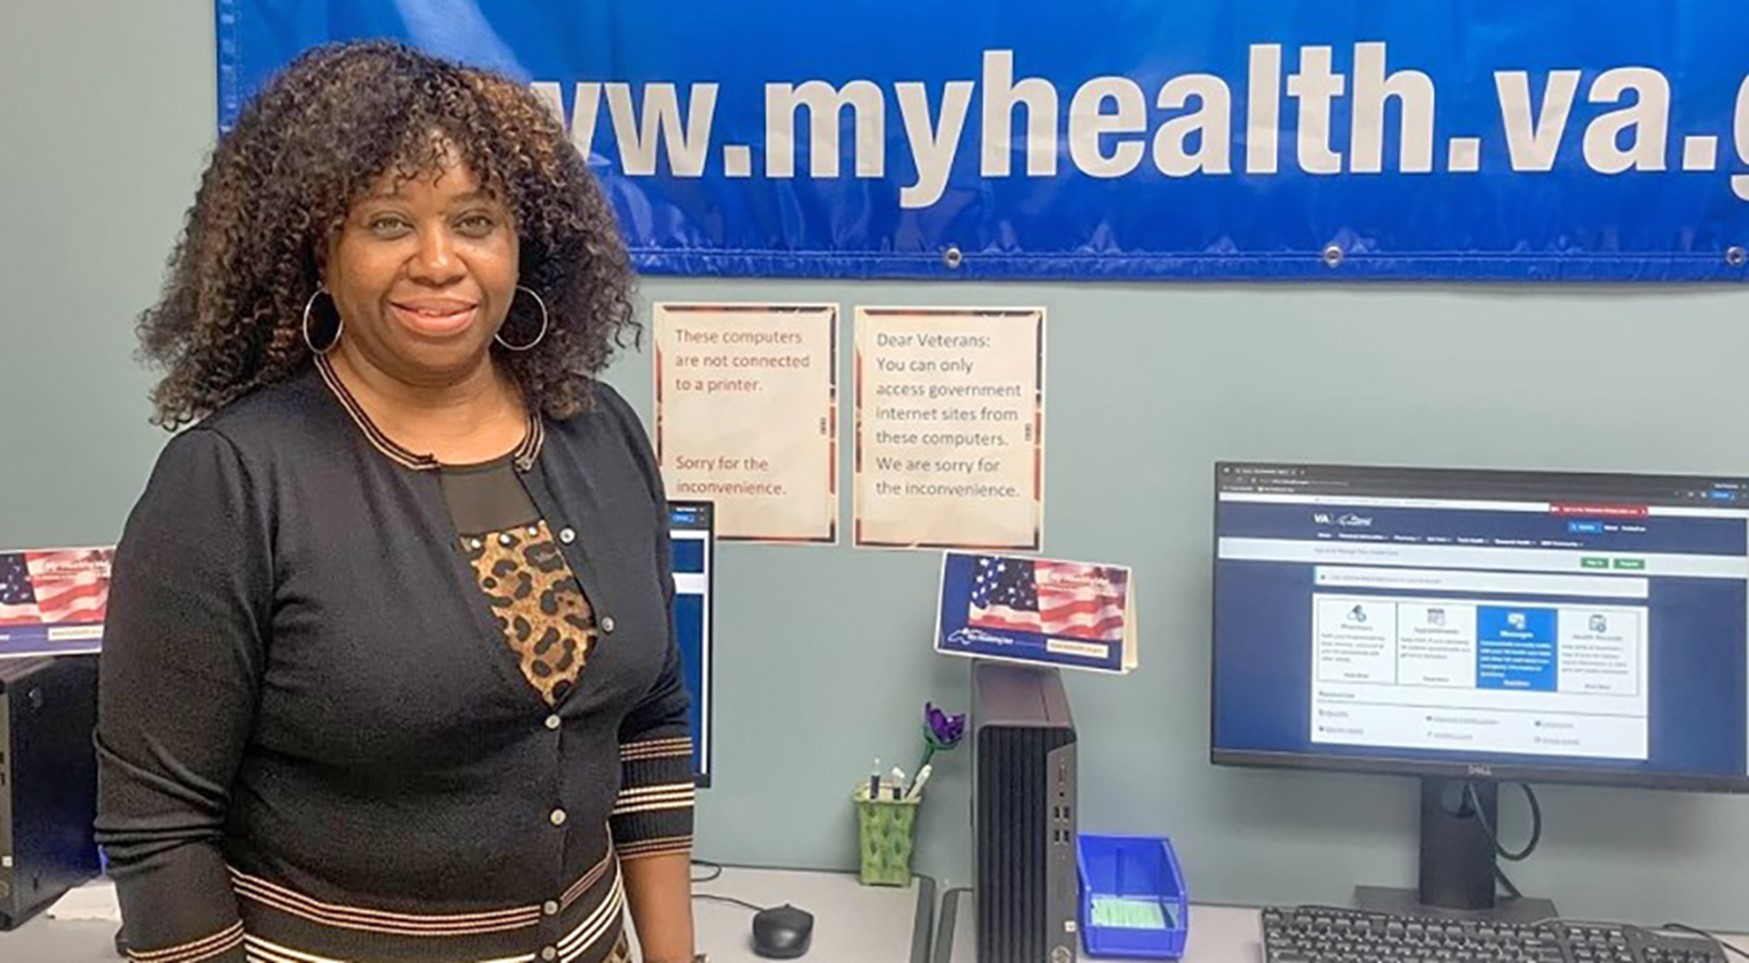 Middle aged Black woman stands in front of My HealtheVet banner in a VA facility